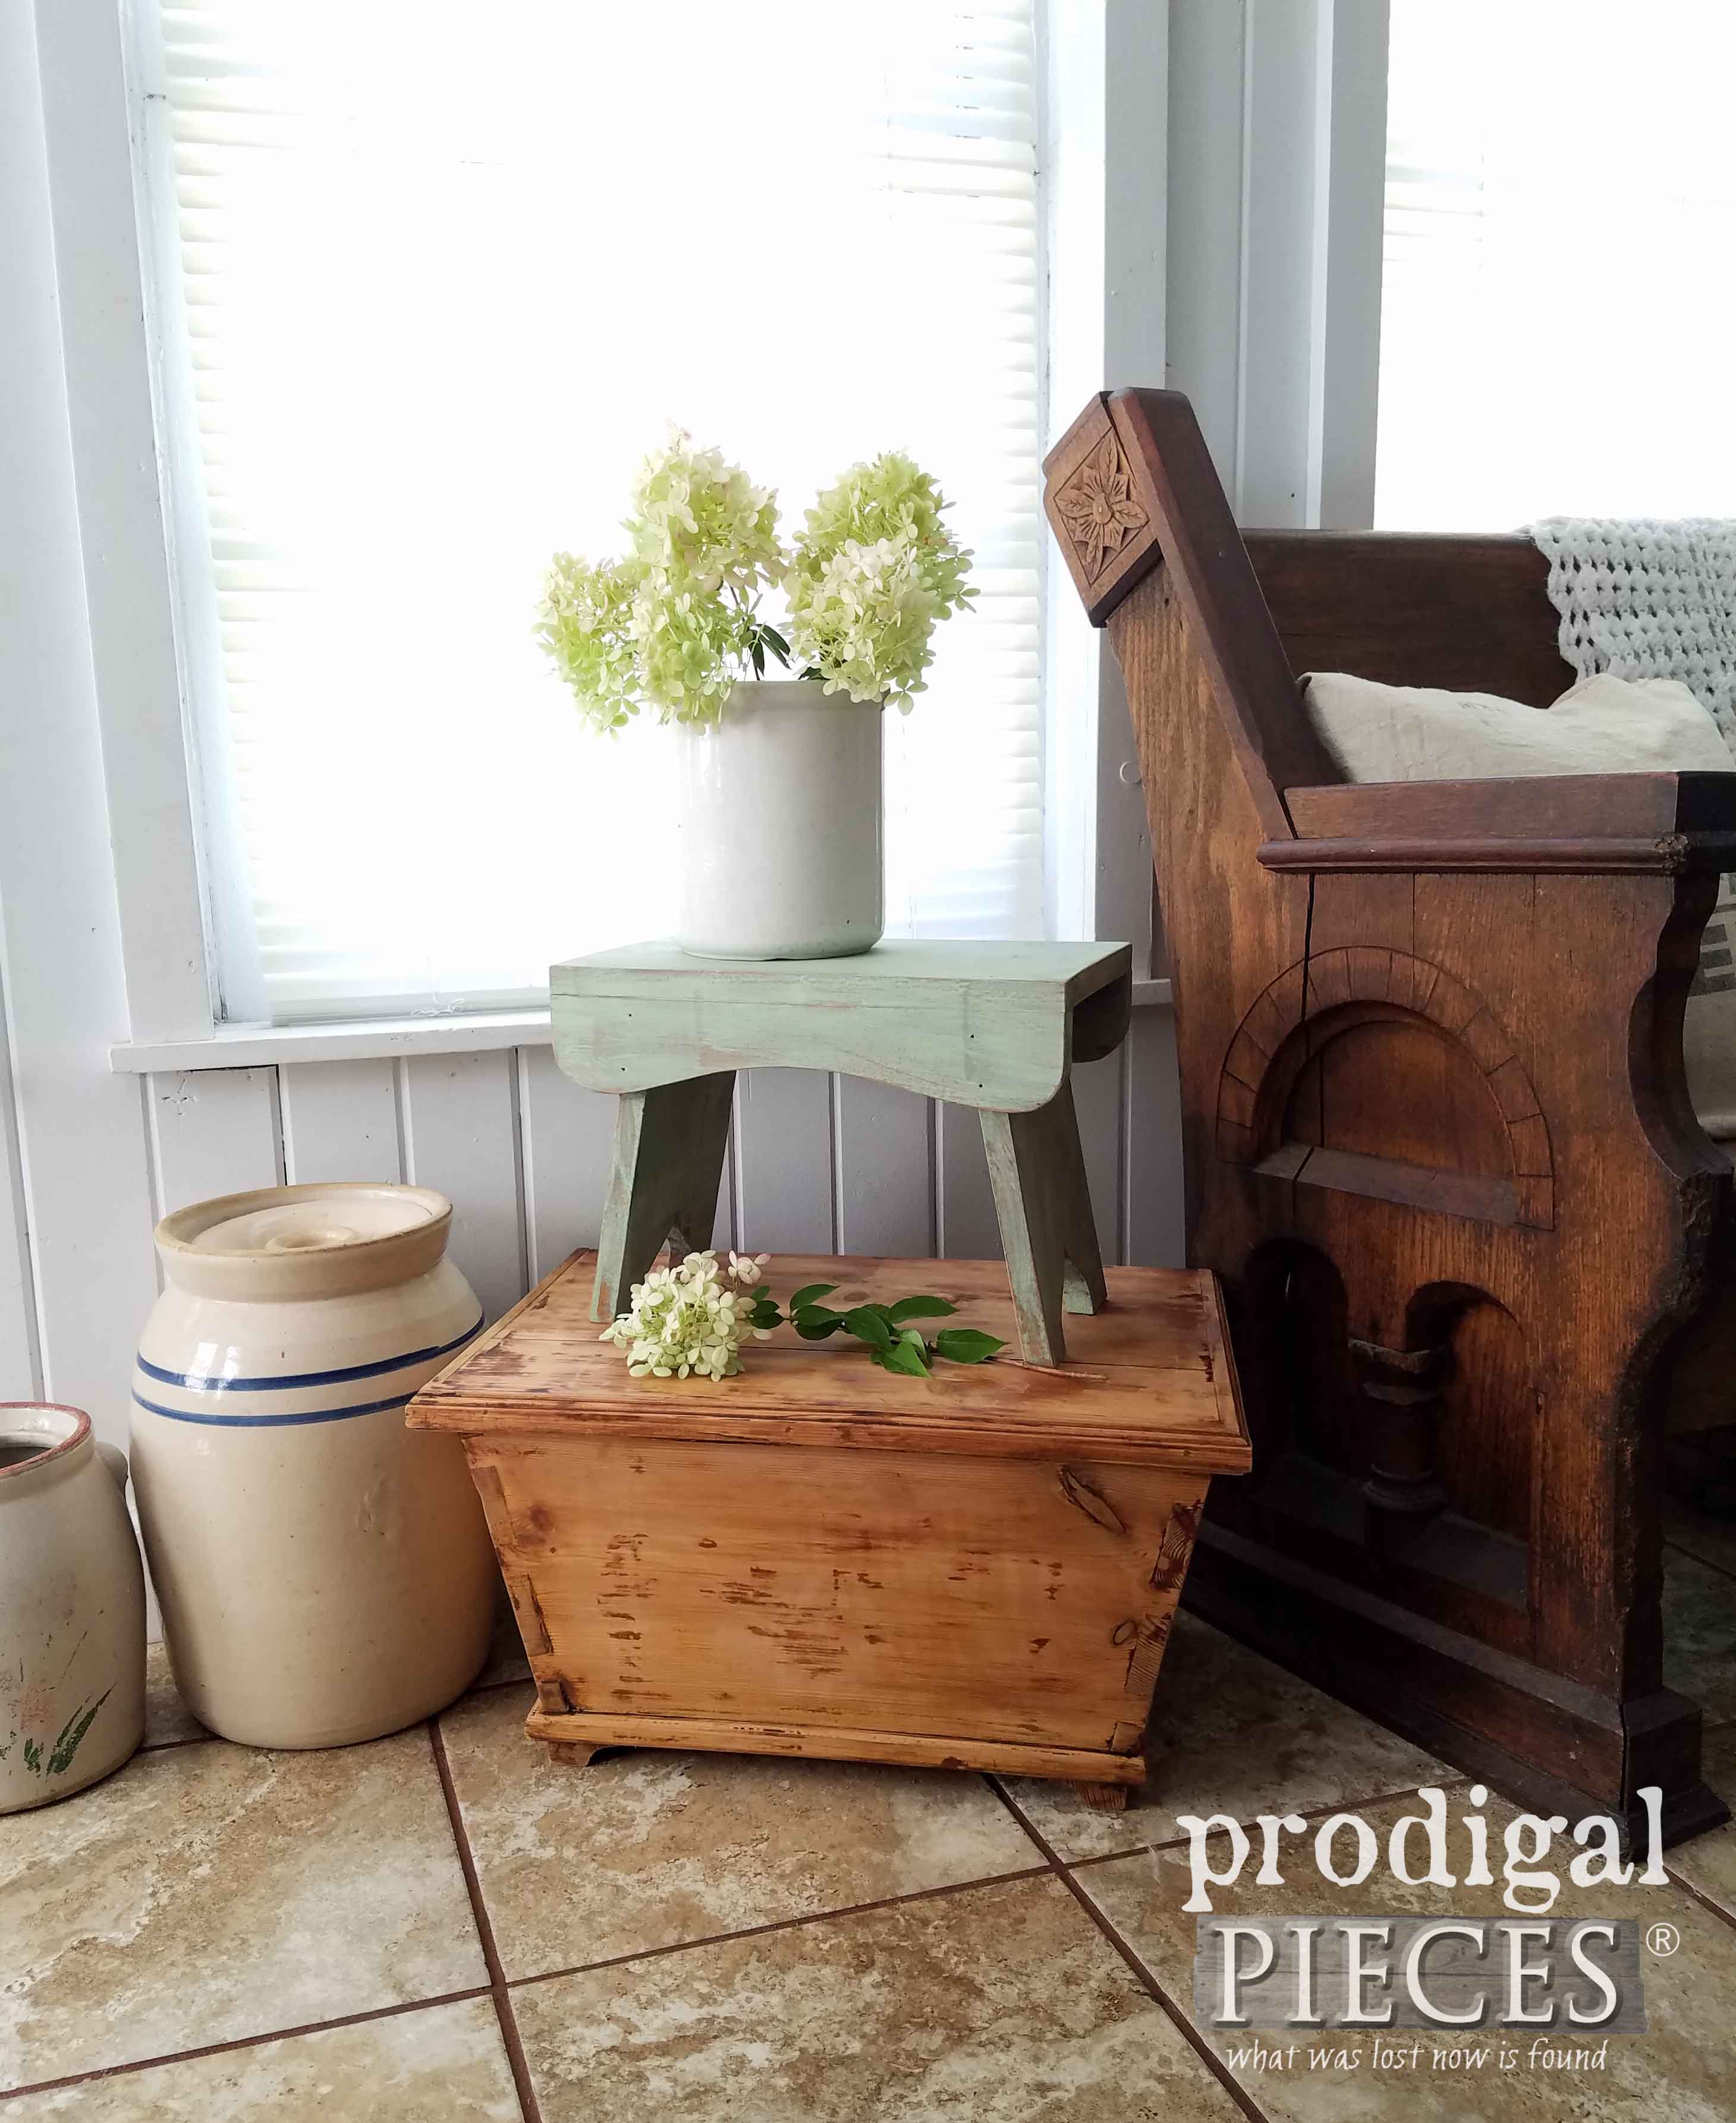 Farmhouse Milking Stool and Wooden Chest Made New for Thrifted Makeovers by Prodigal Pieces | prodigalpieces.com